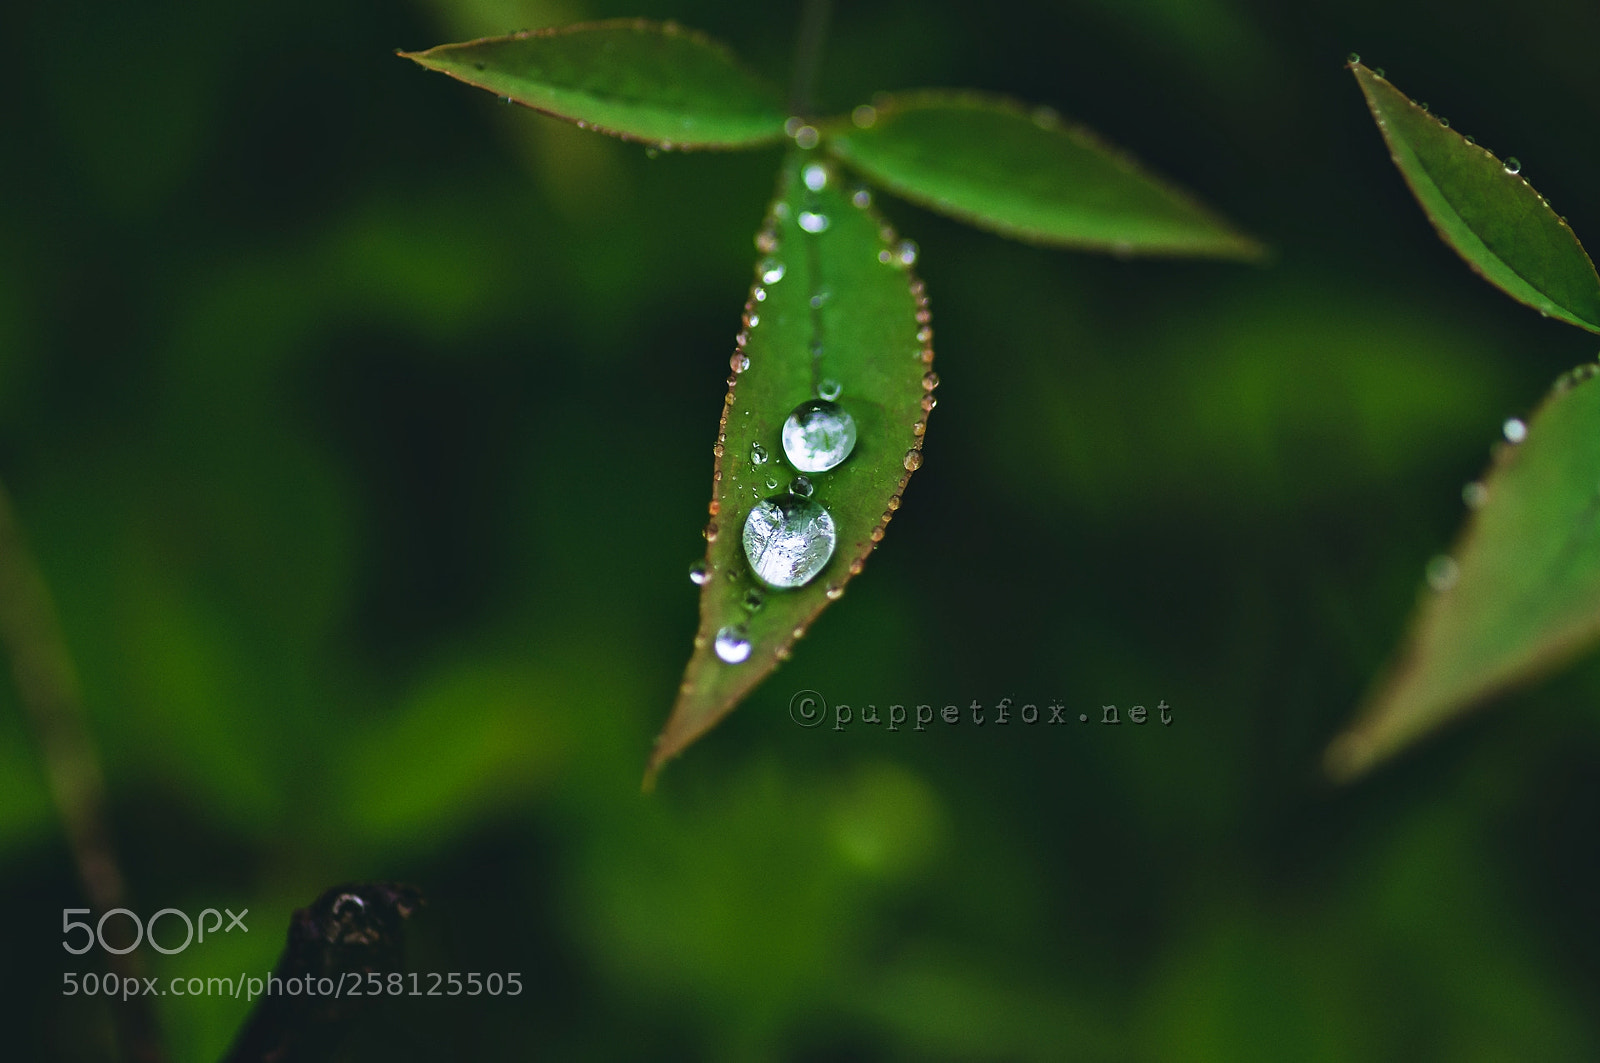 Pentax K-r sample photo. Raindrops on the leaf photography